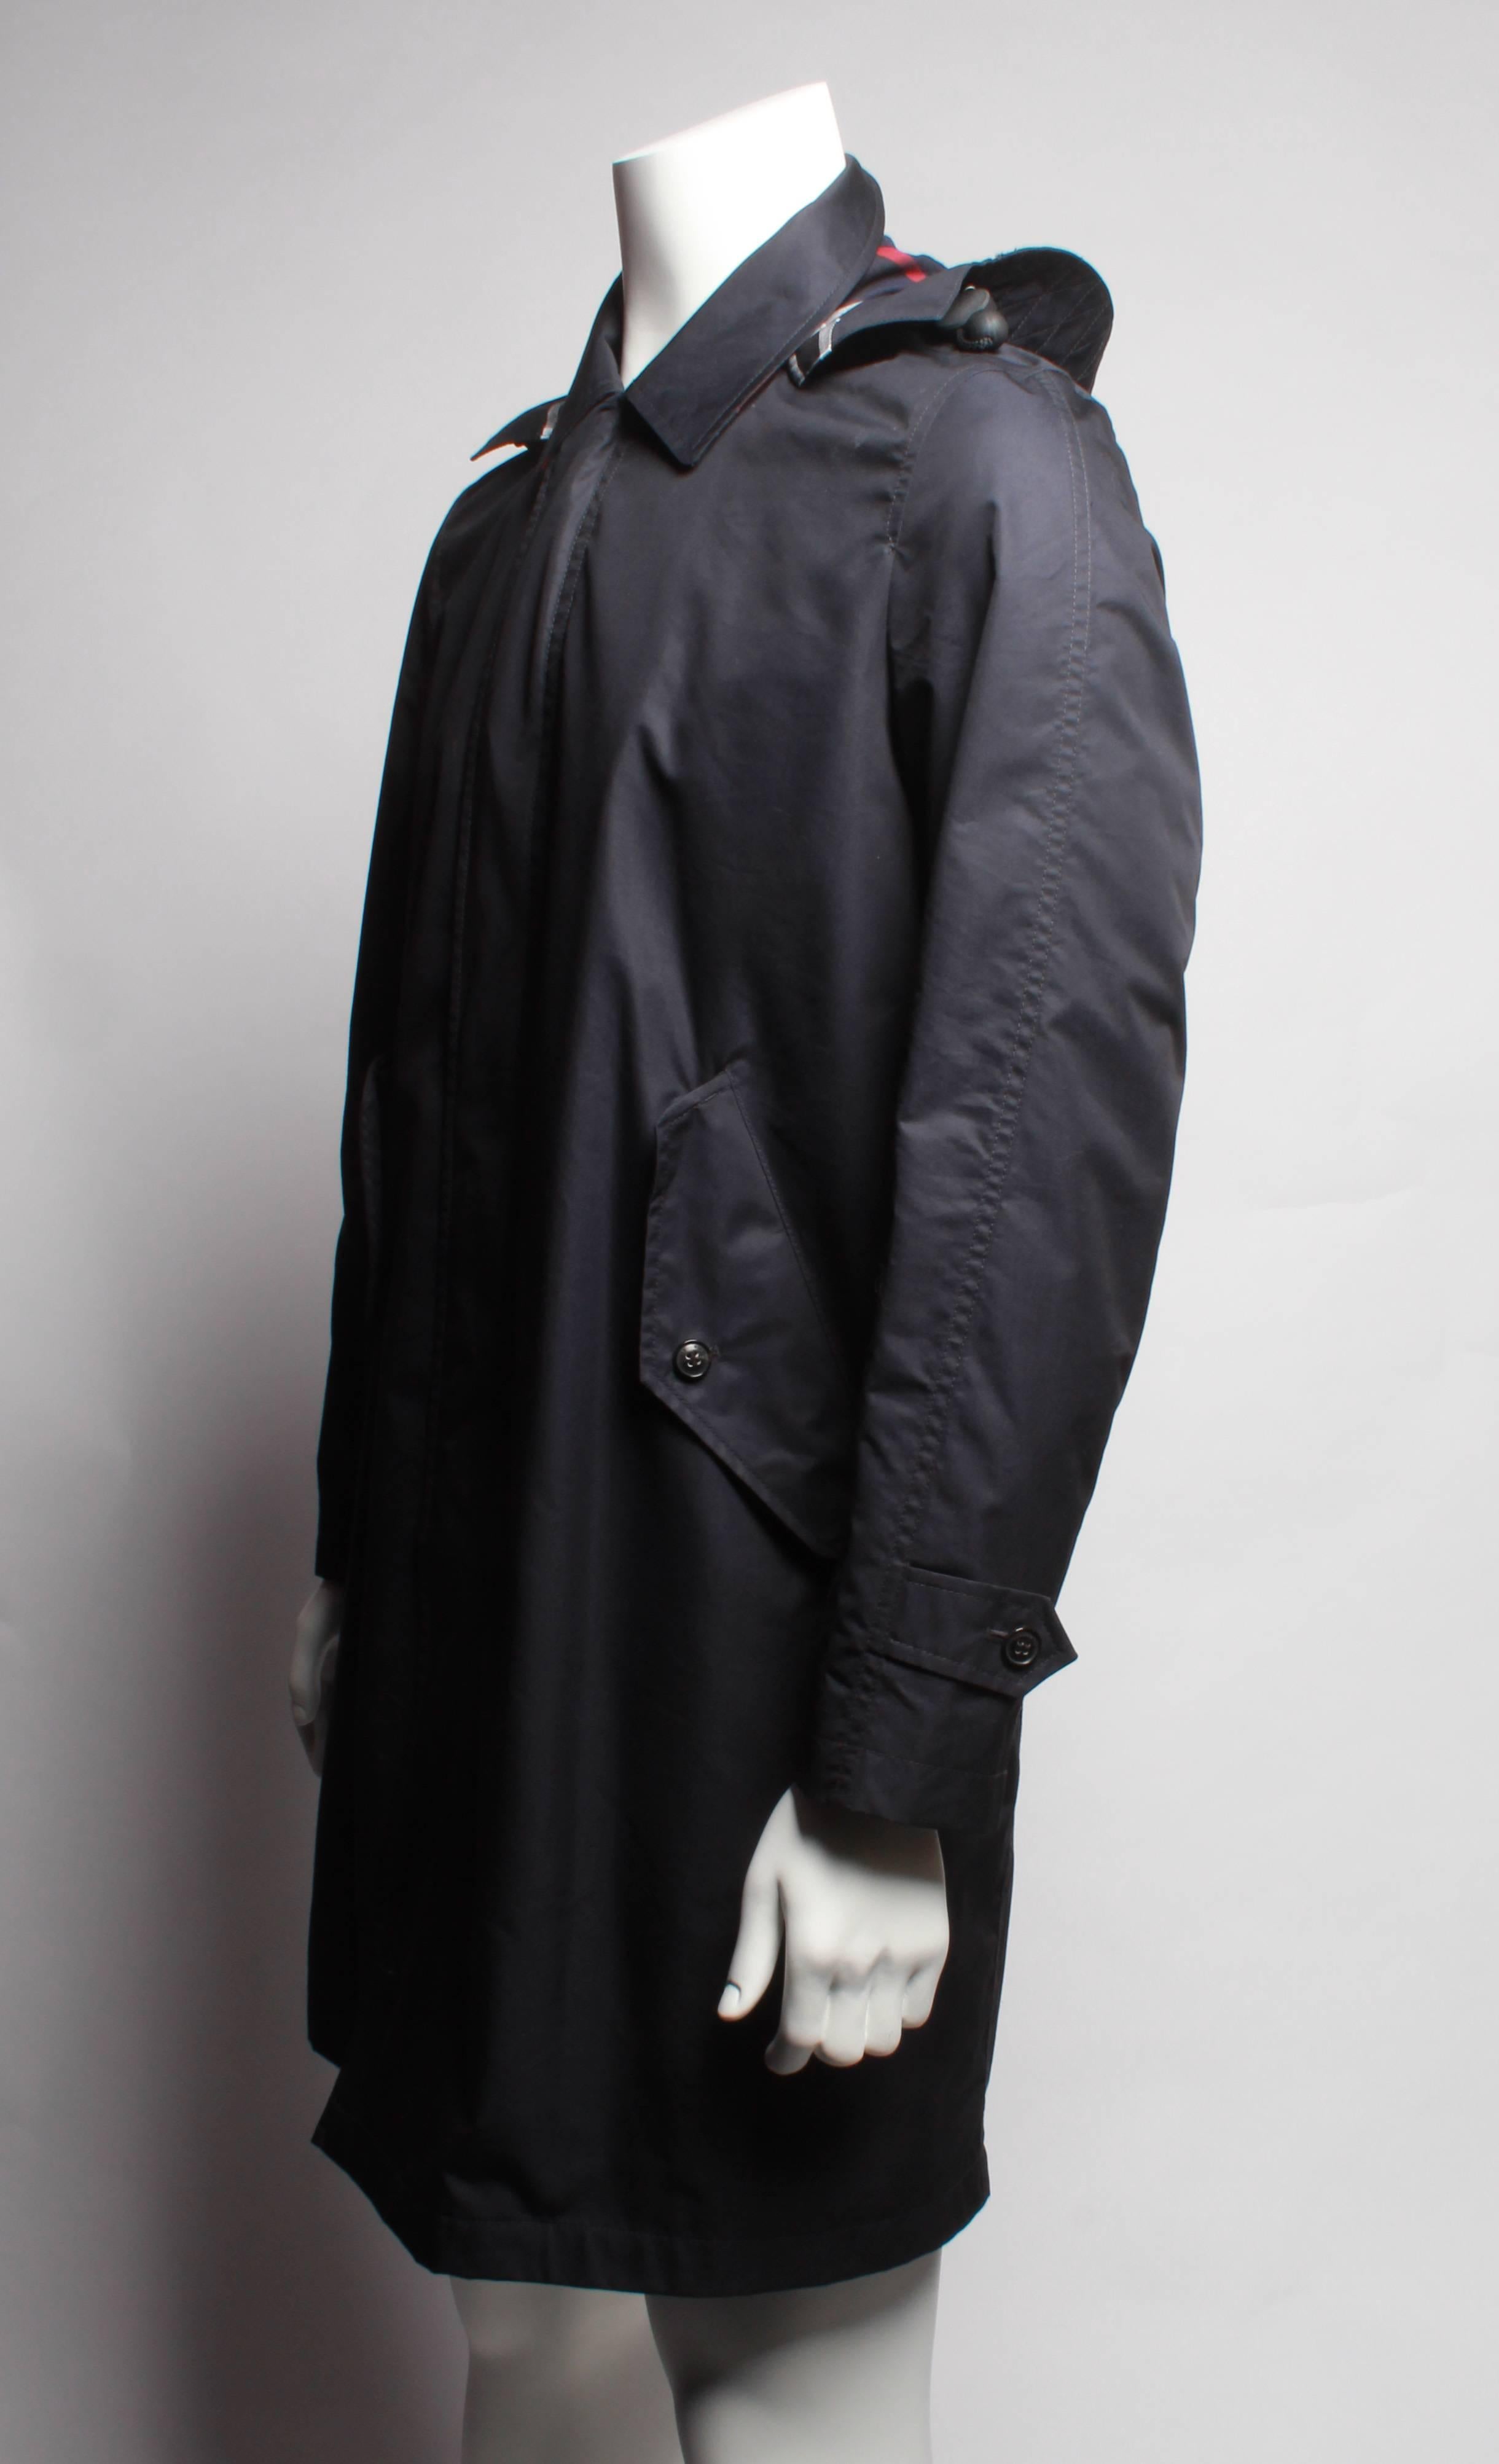 A showerproof car coat in a resin-backed cotton blend. Engineered for changeable weather, the coat features a protective hood that can be detached on dry days. NTW, never worn. 

Size:  50
Outer: 65% cotton, 35% polyamide
Check undercollar: 100%